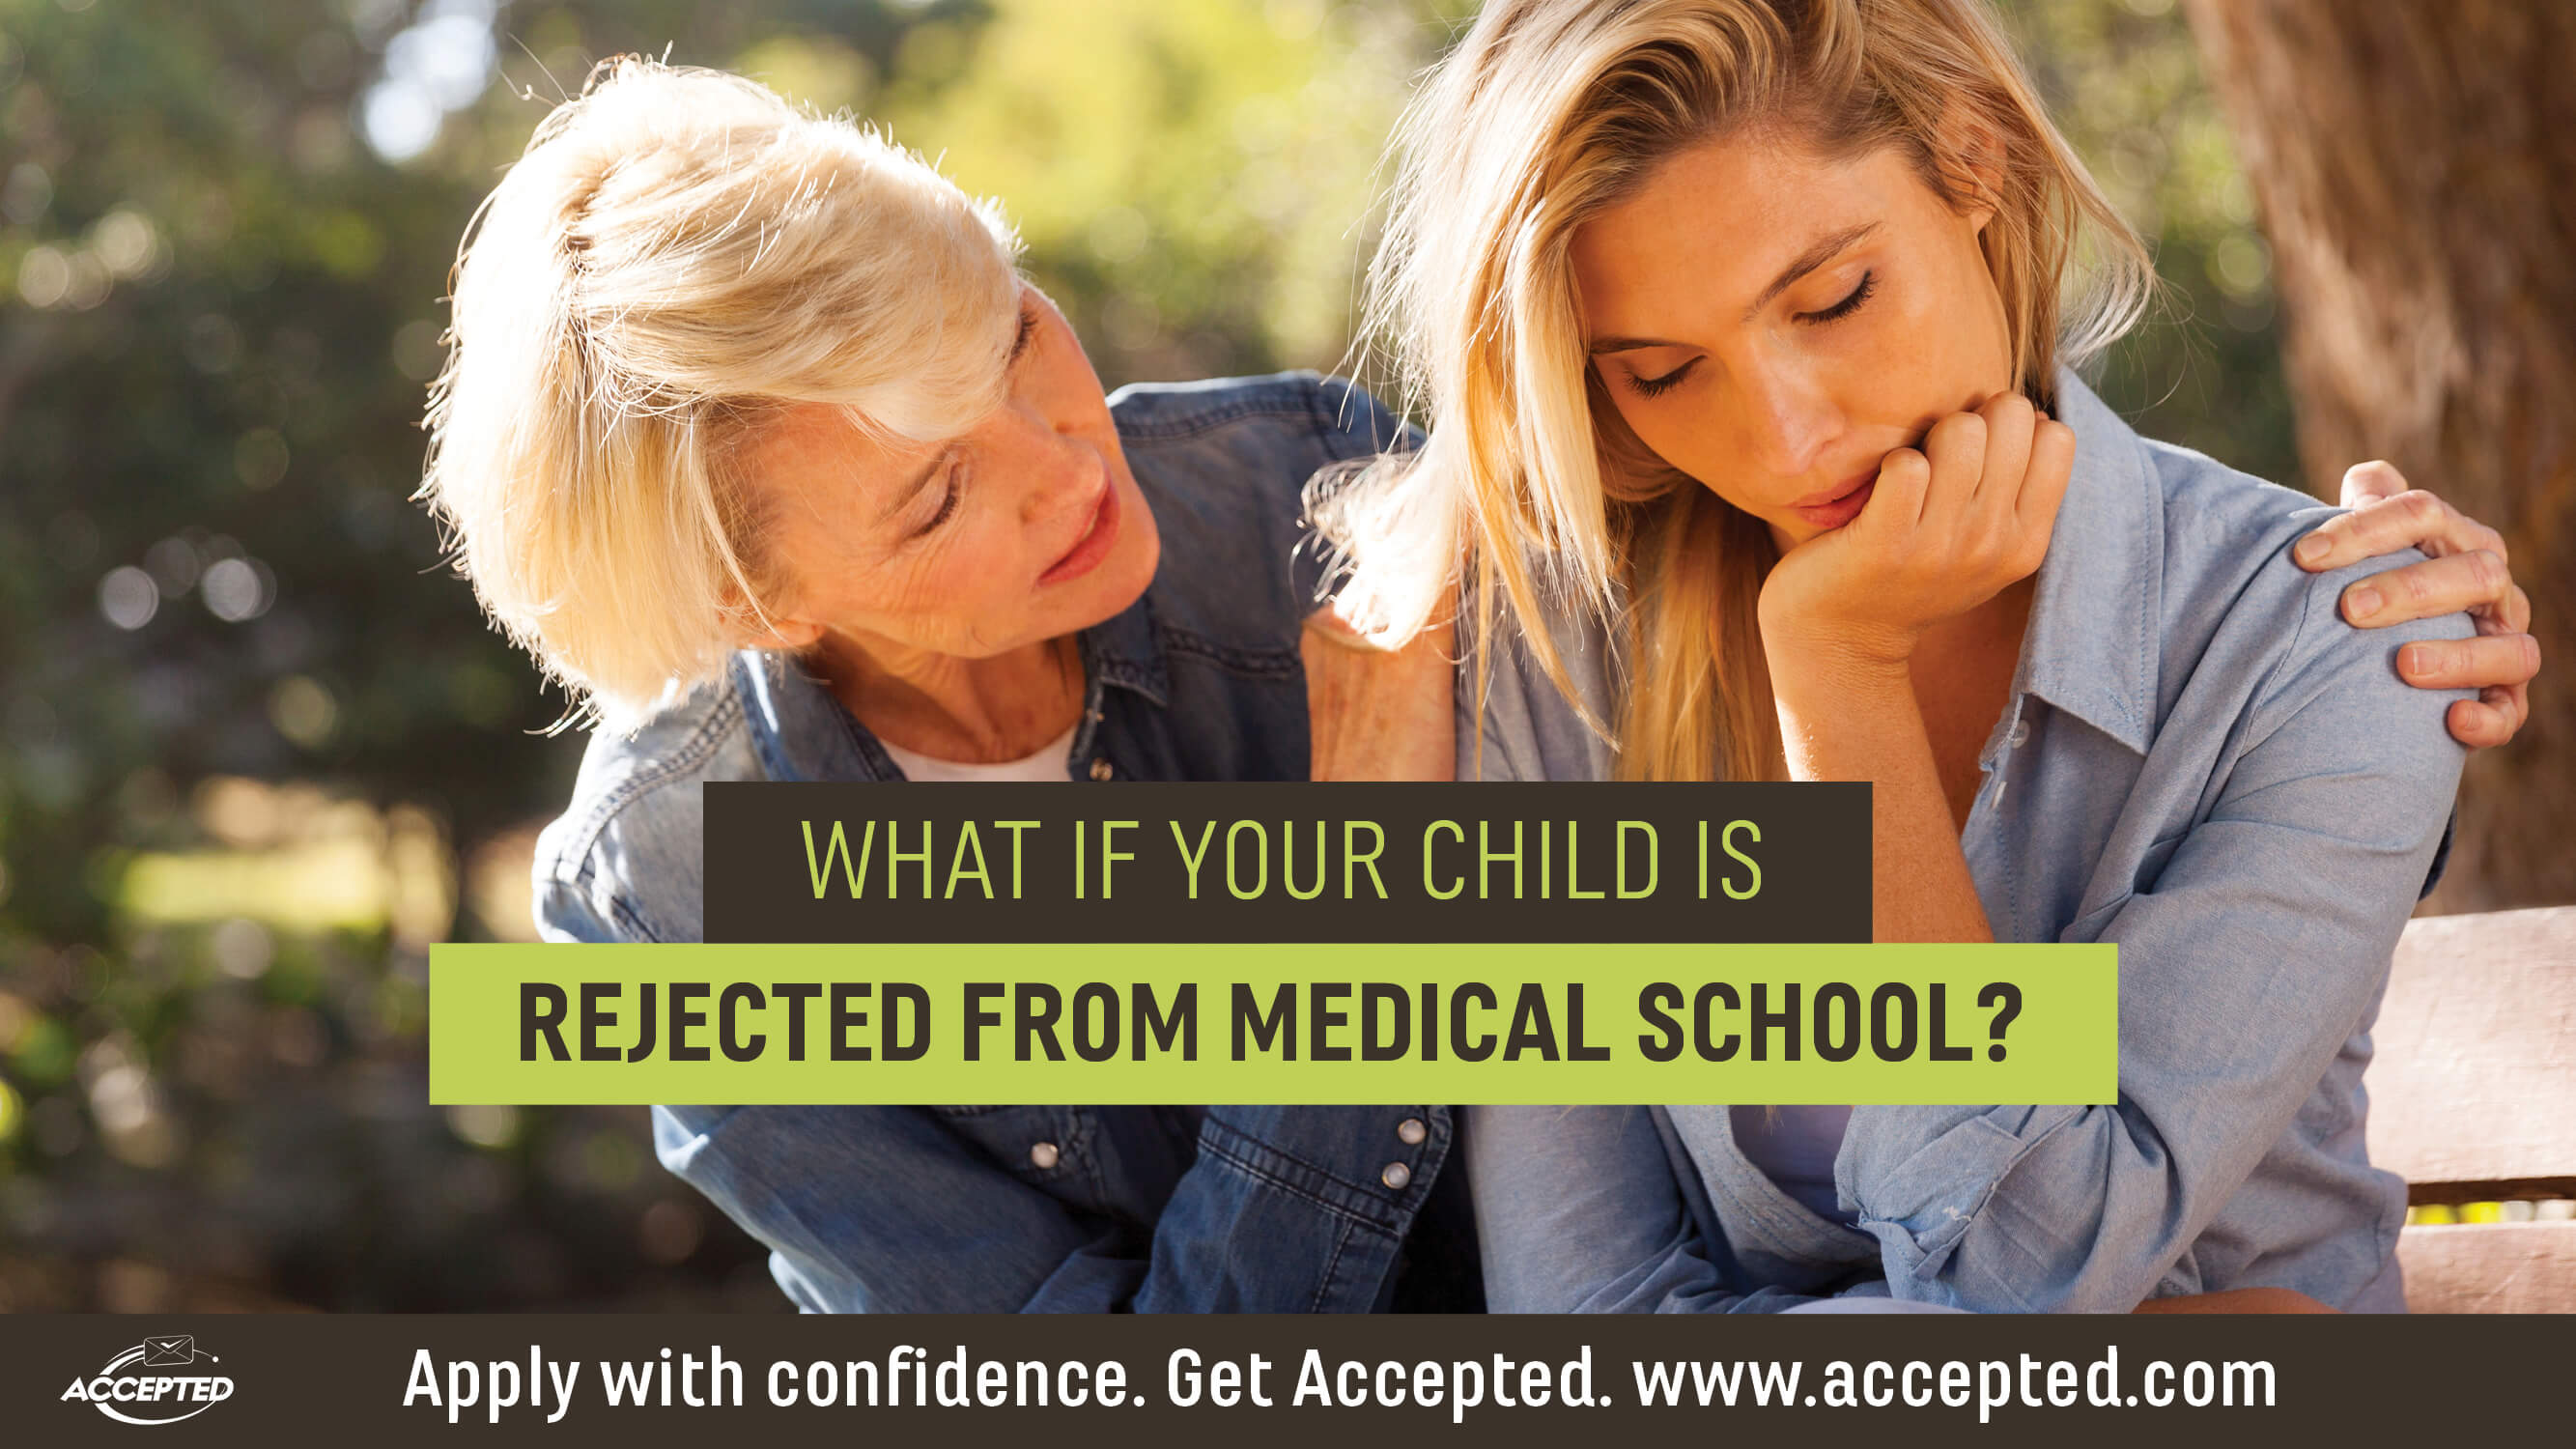 What if Your Child is Rejected from Medical School?